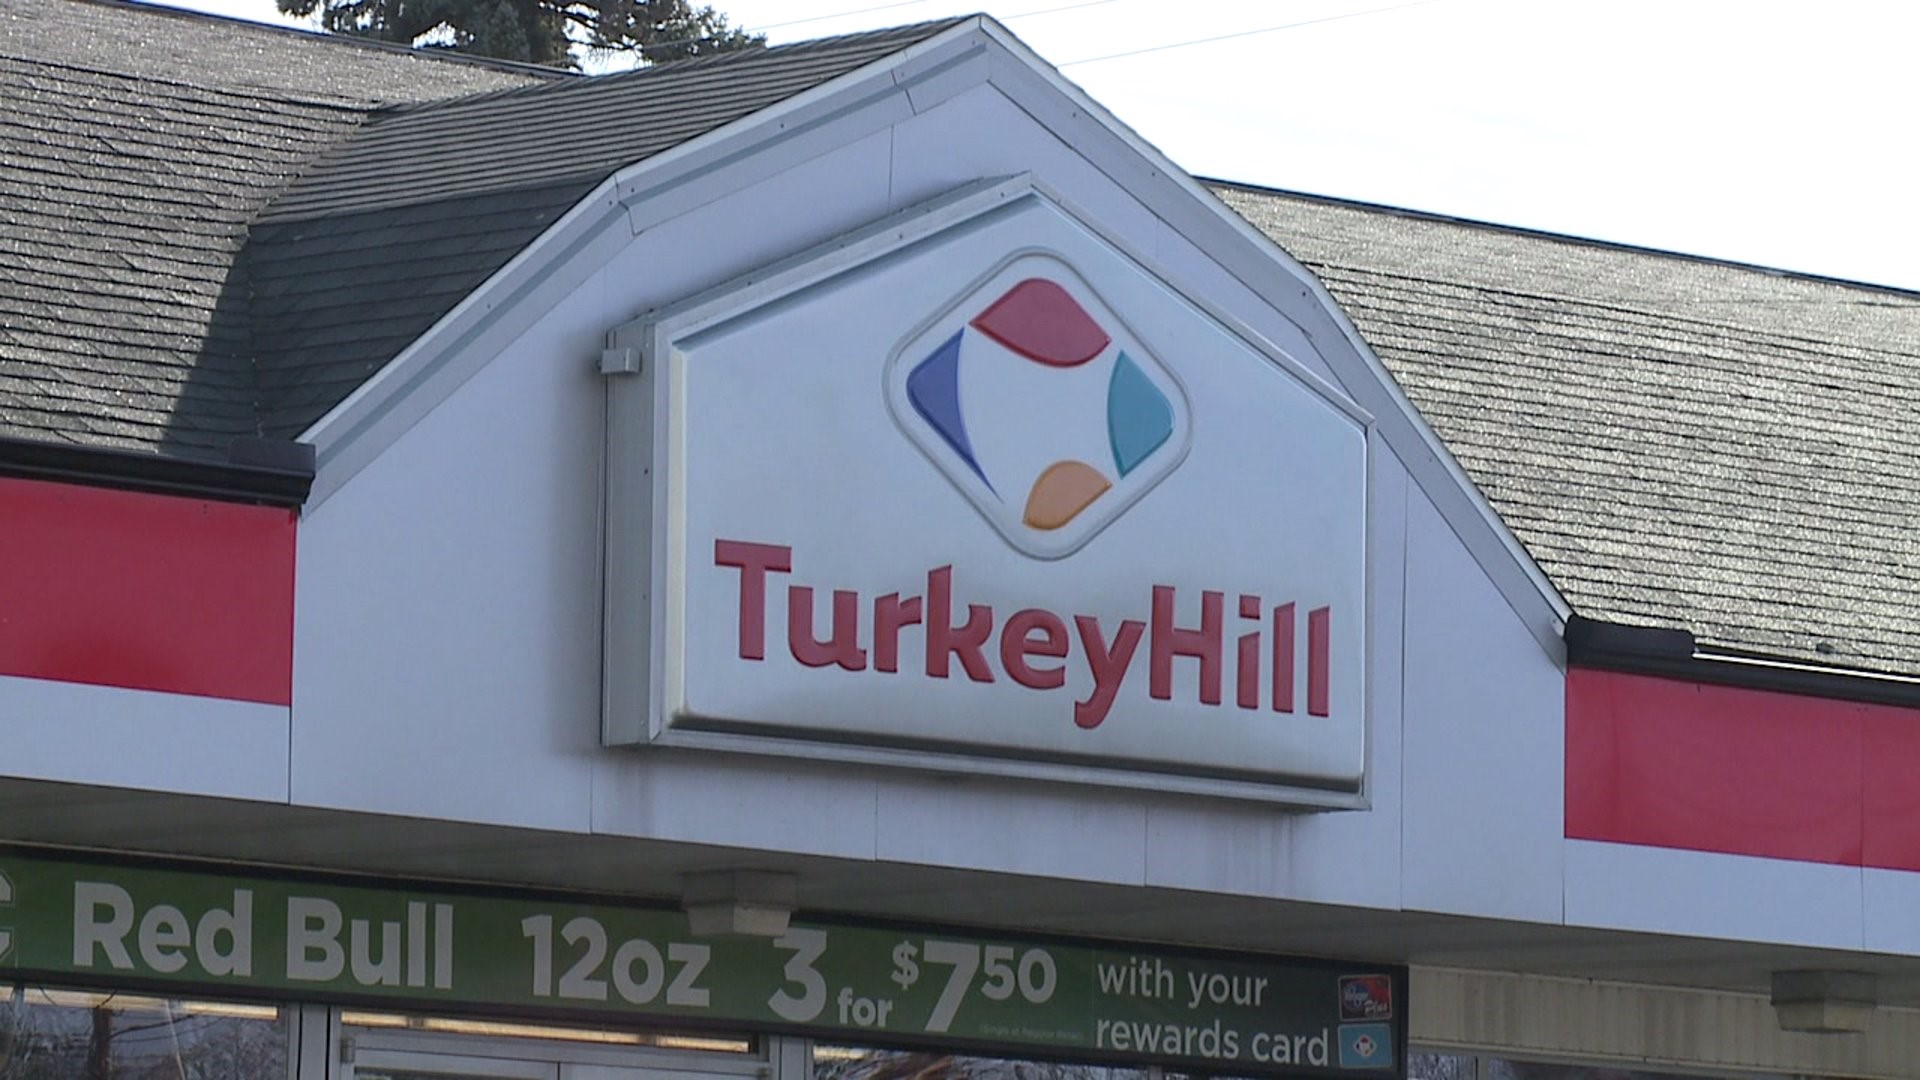 Wilkes-Barre Police Investigating Turkey Hill Robbery